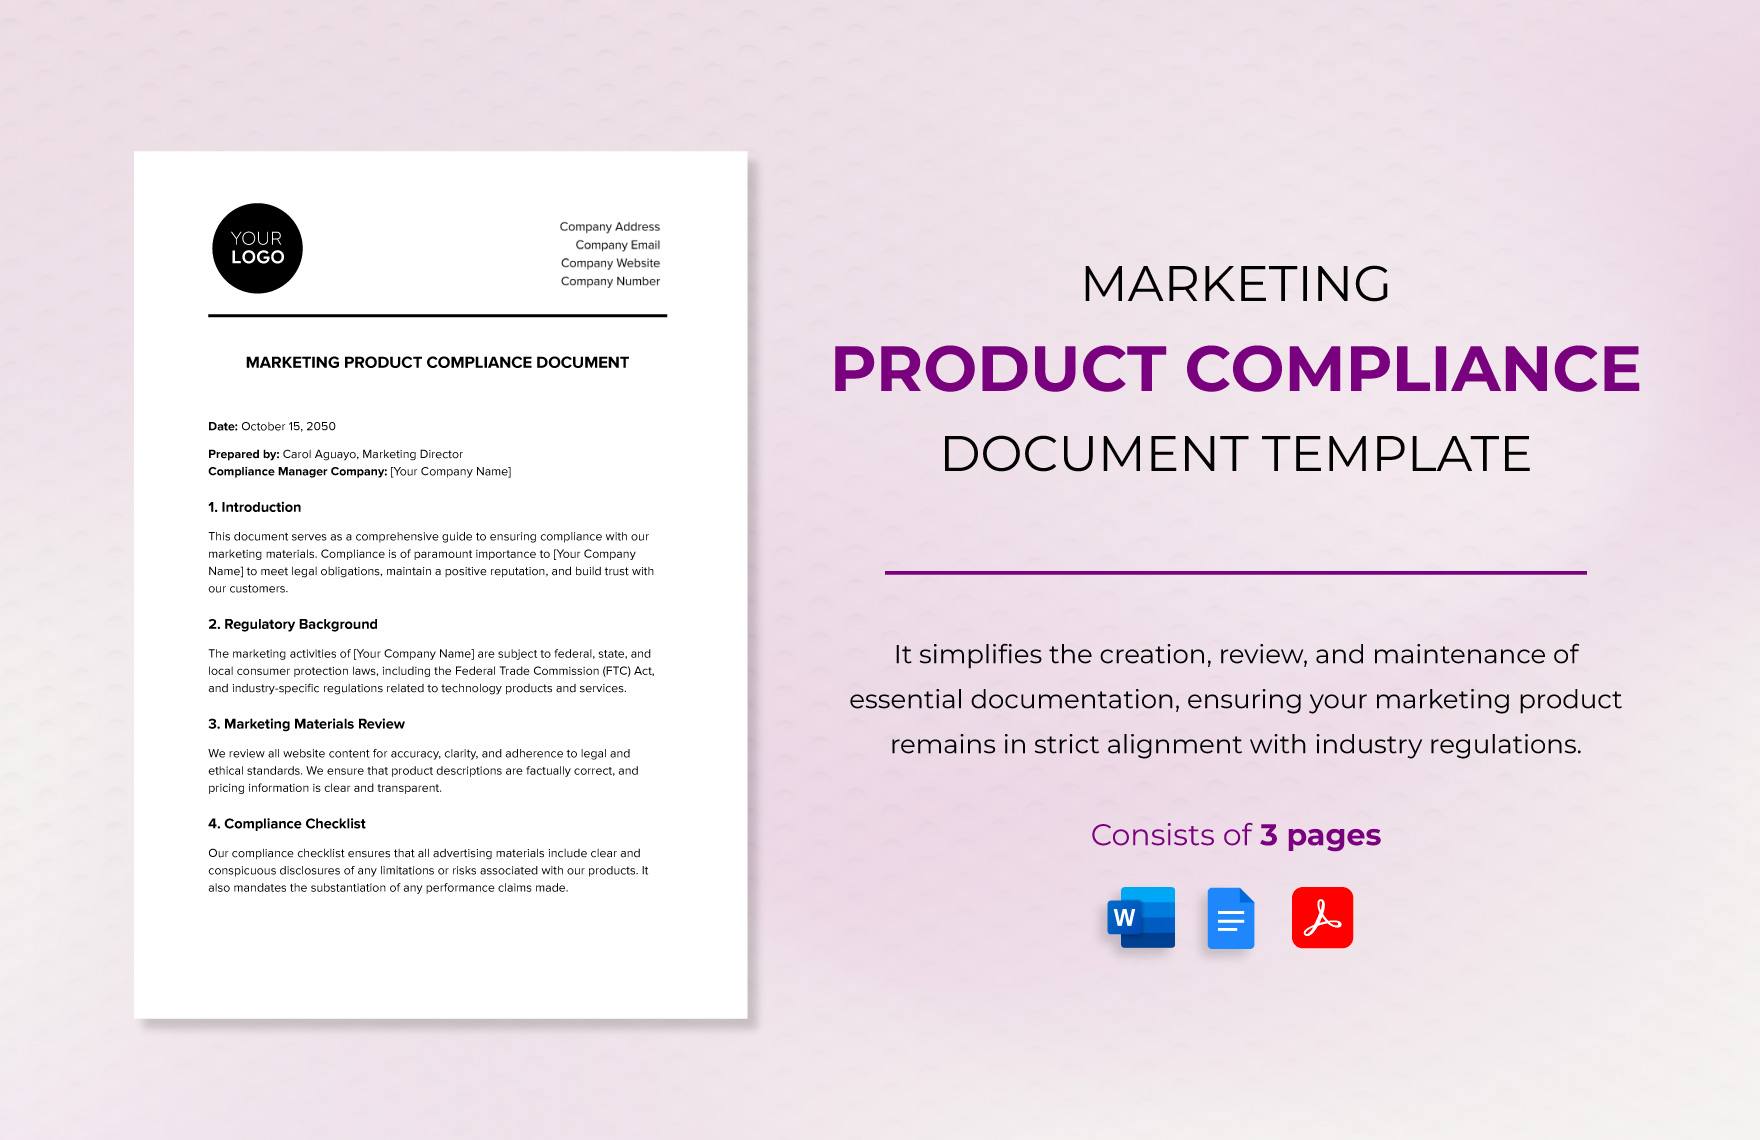 Marketing Product Compliance Document Template in Word, Google Docs, PDF